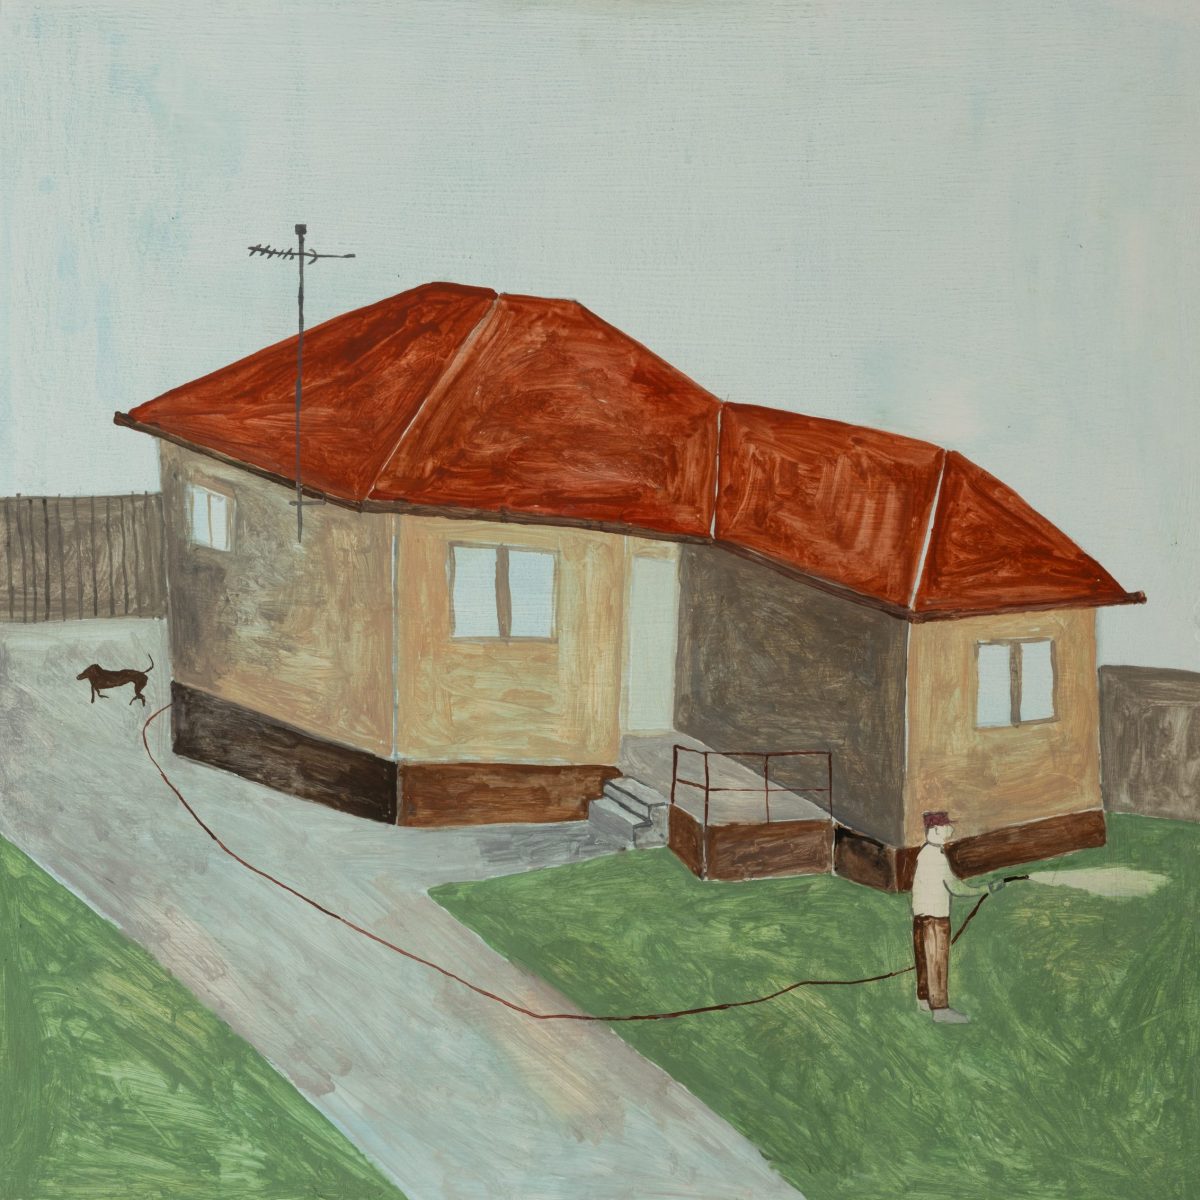 Painting of a man hosing his lawn of a suburban house with a dog in the background